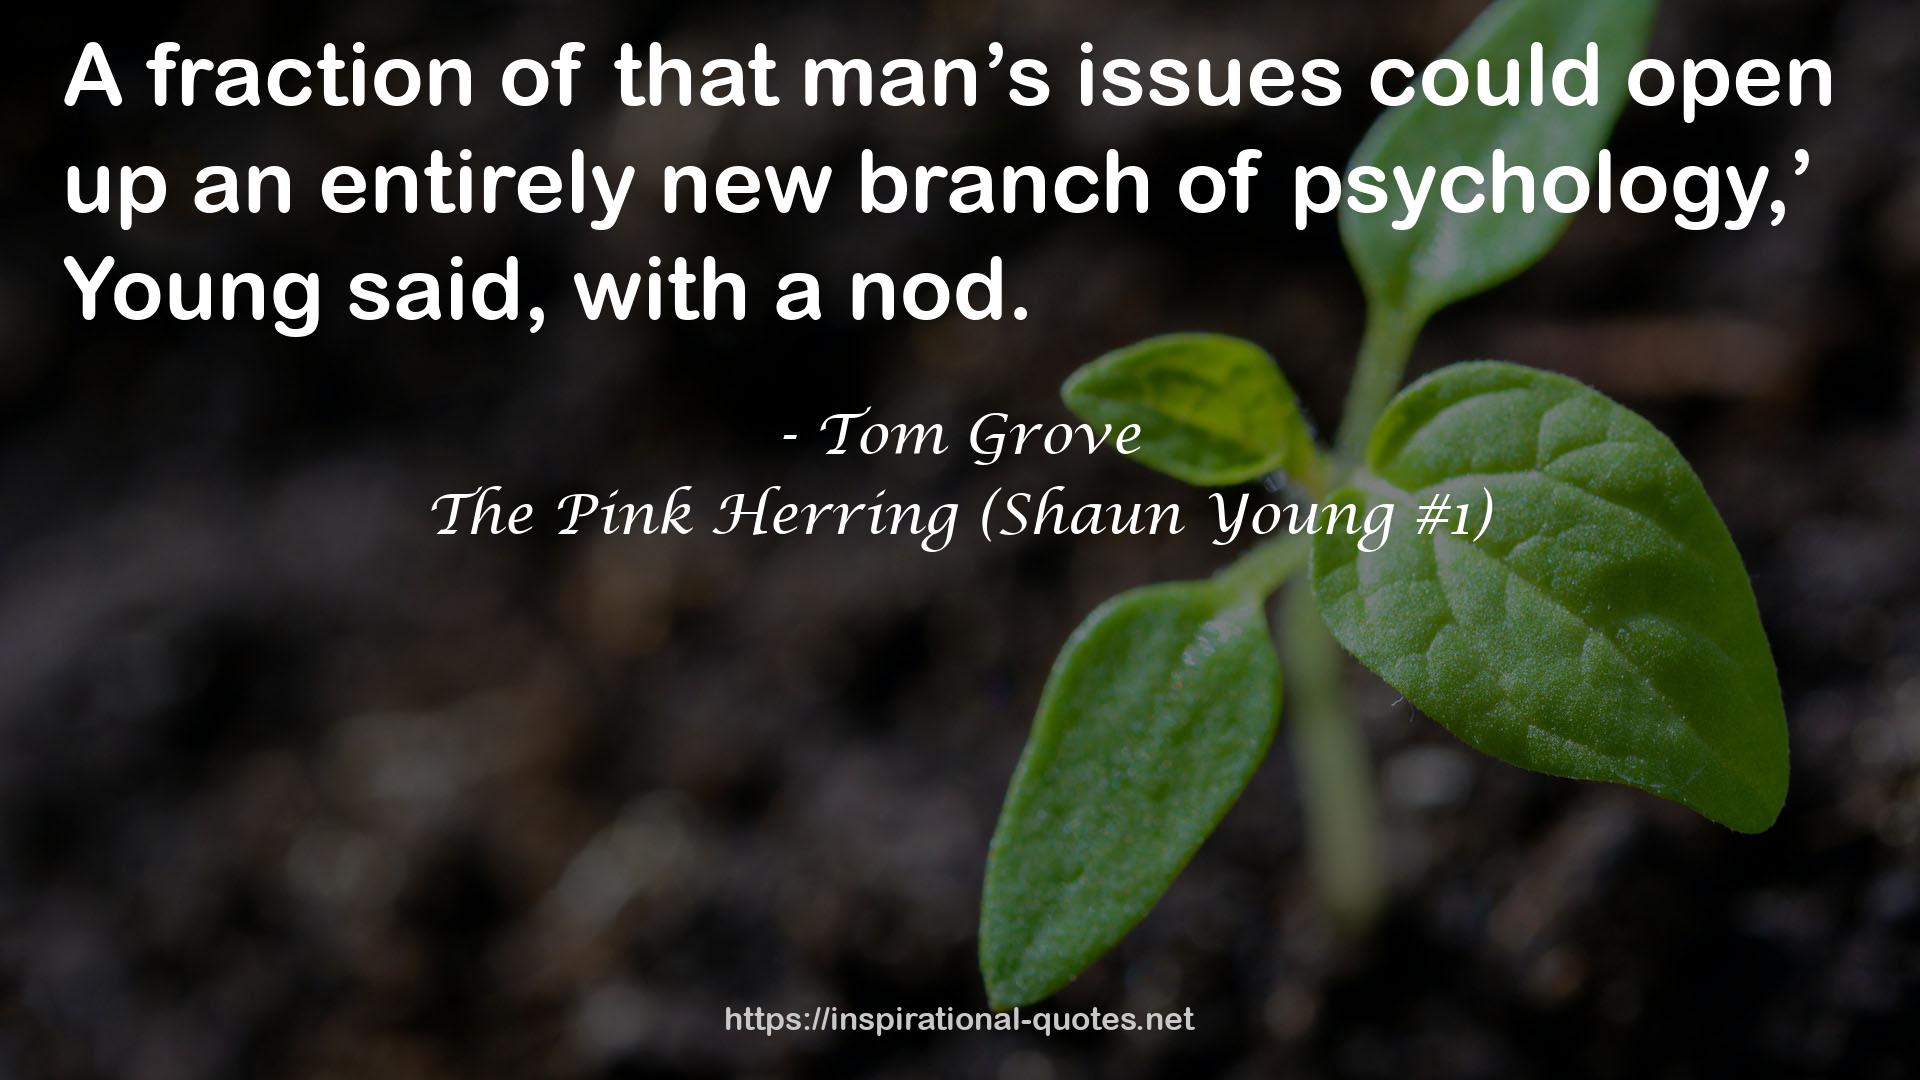 The Pink Herring (Shaun Young #1) QUOTES